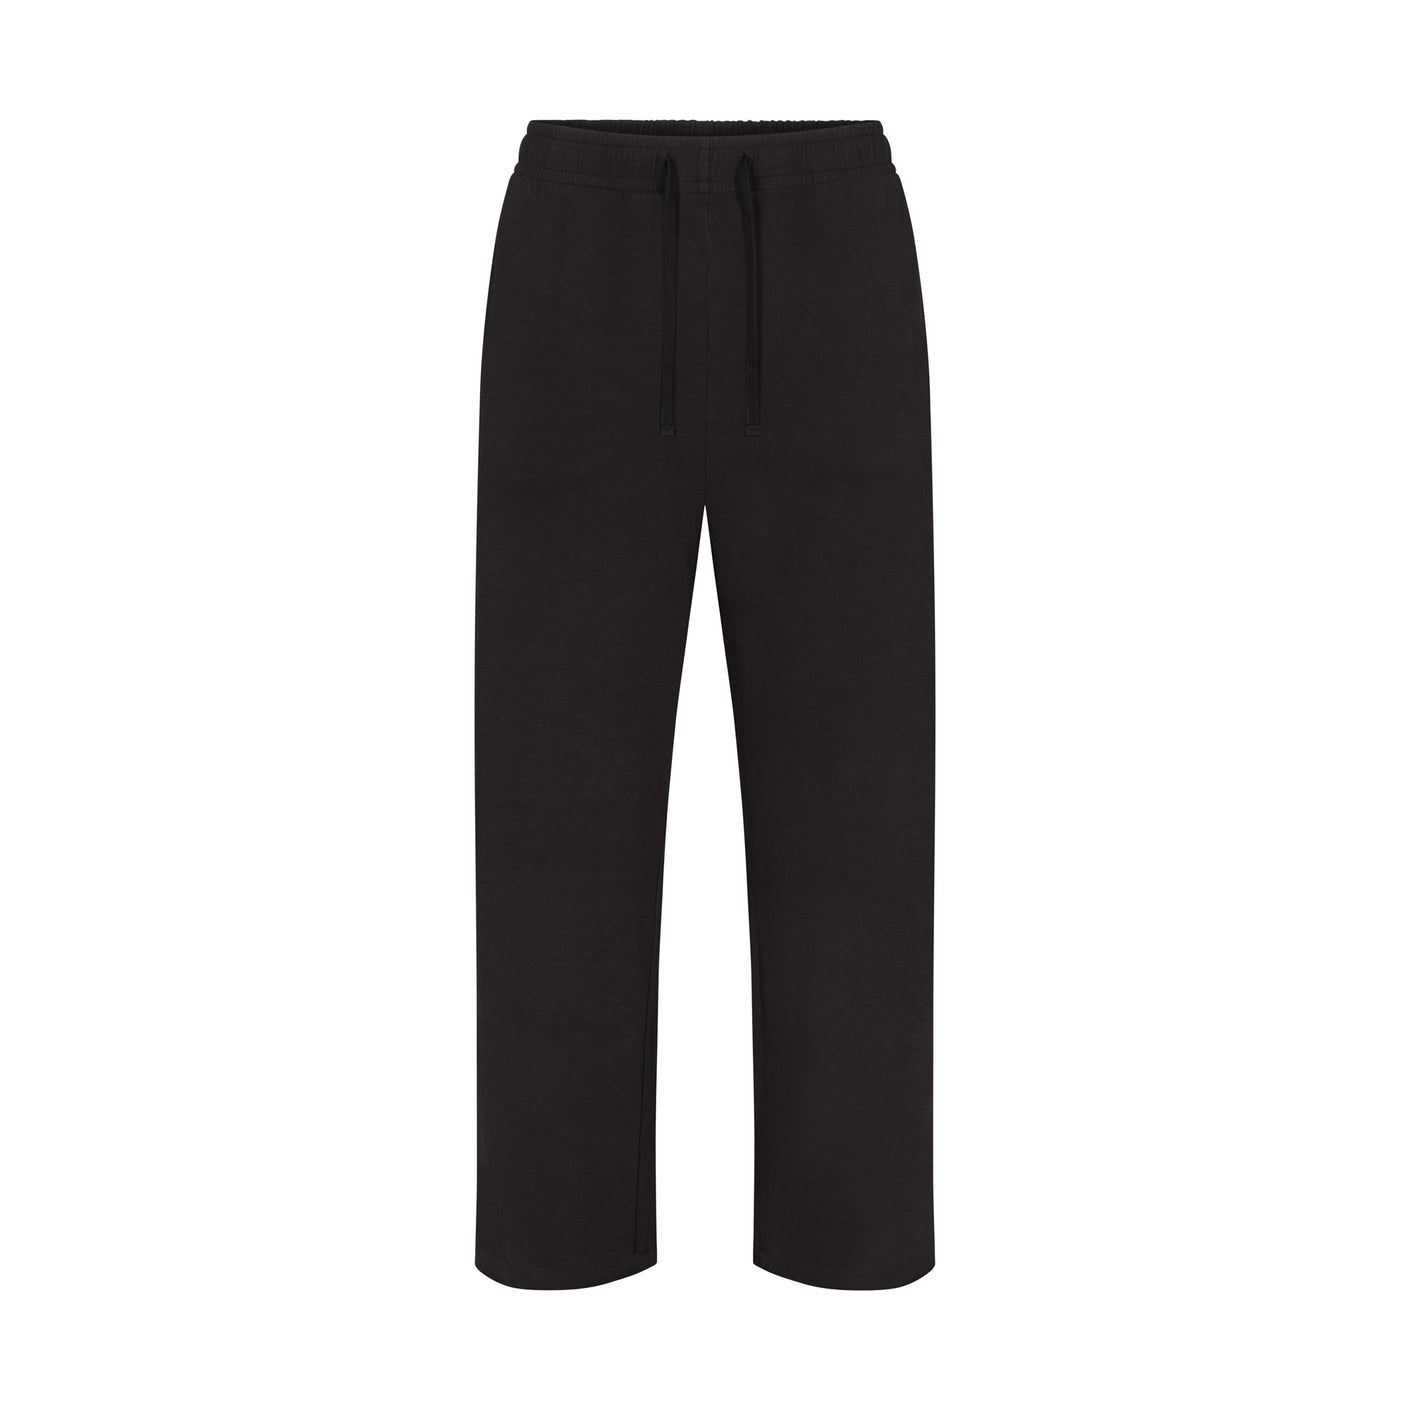 JERSEY LOUNGE MENS RELAXED STRAIGHT LEG PANT